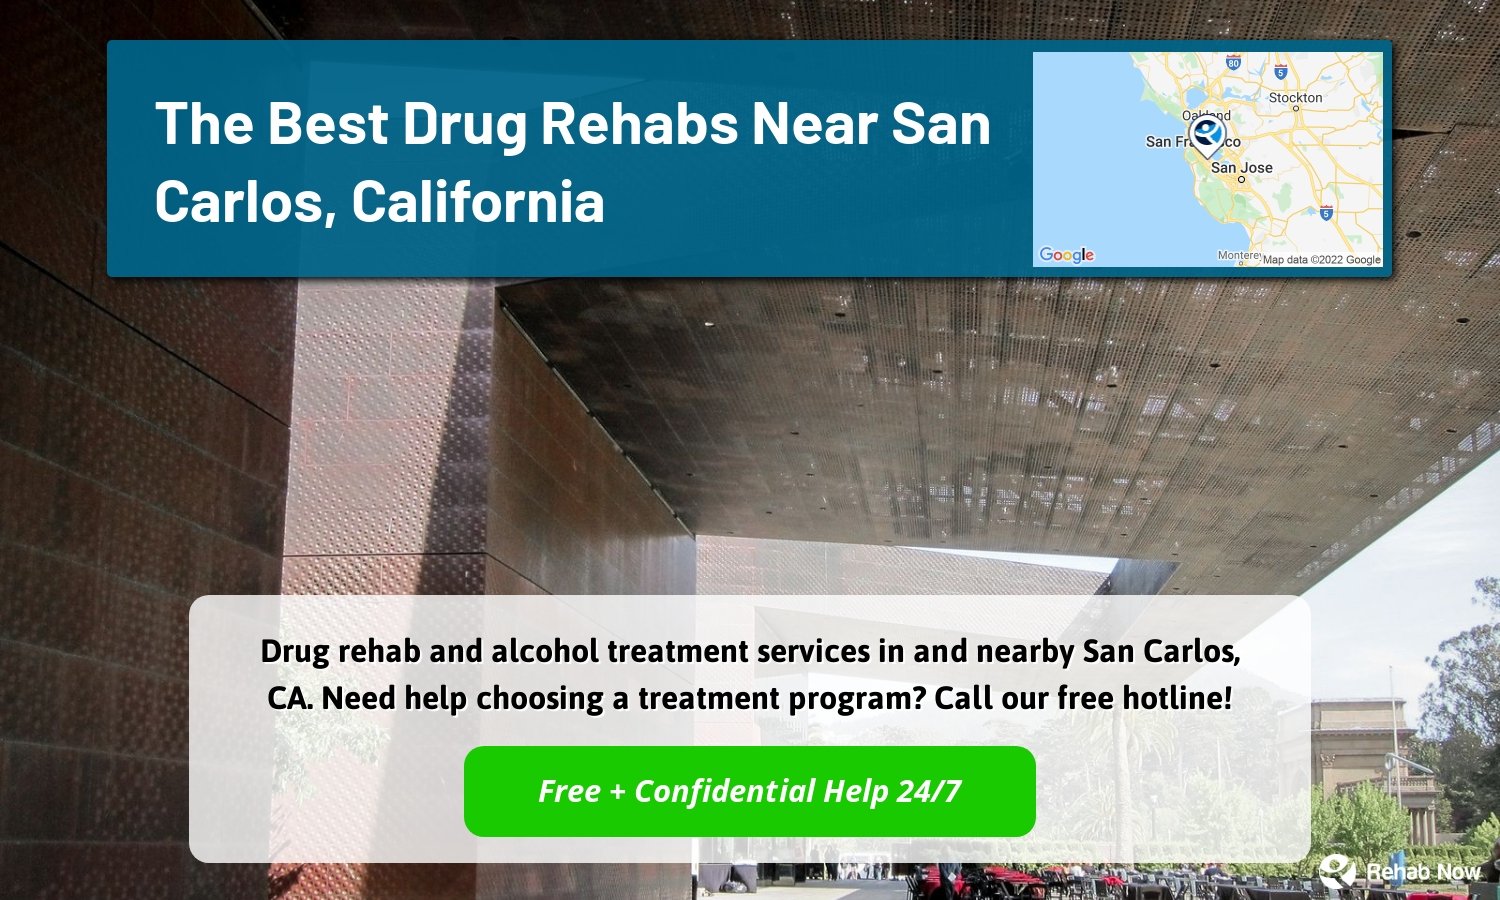 Drug rehab and alcohol treatment services in and nearby San Carlos, CA. Need help choosing a treatment program? Call our free hotline!